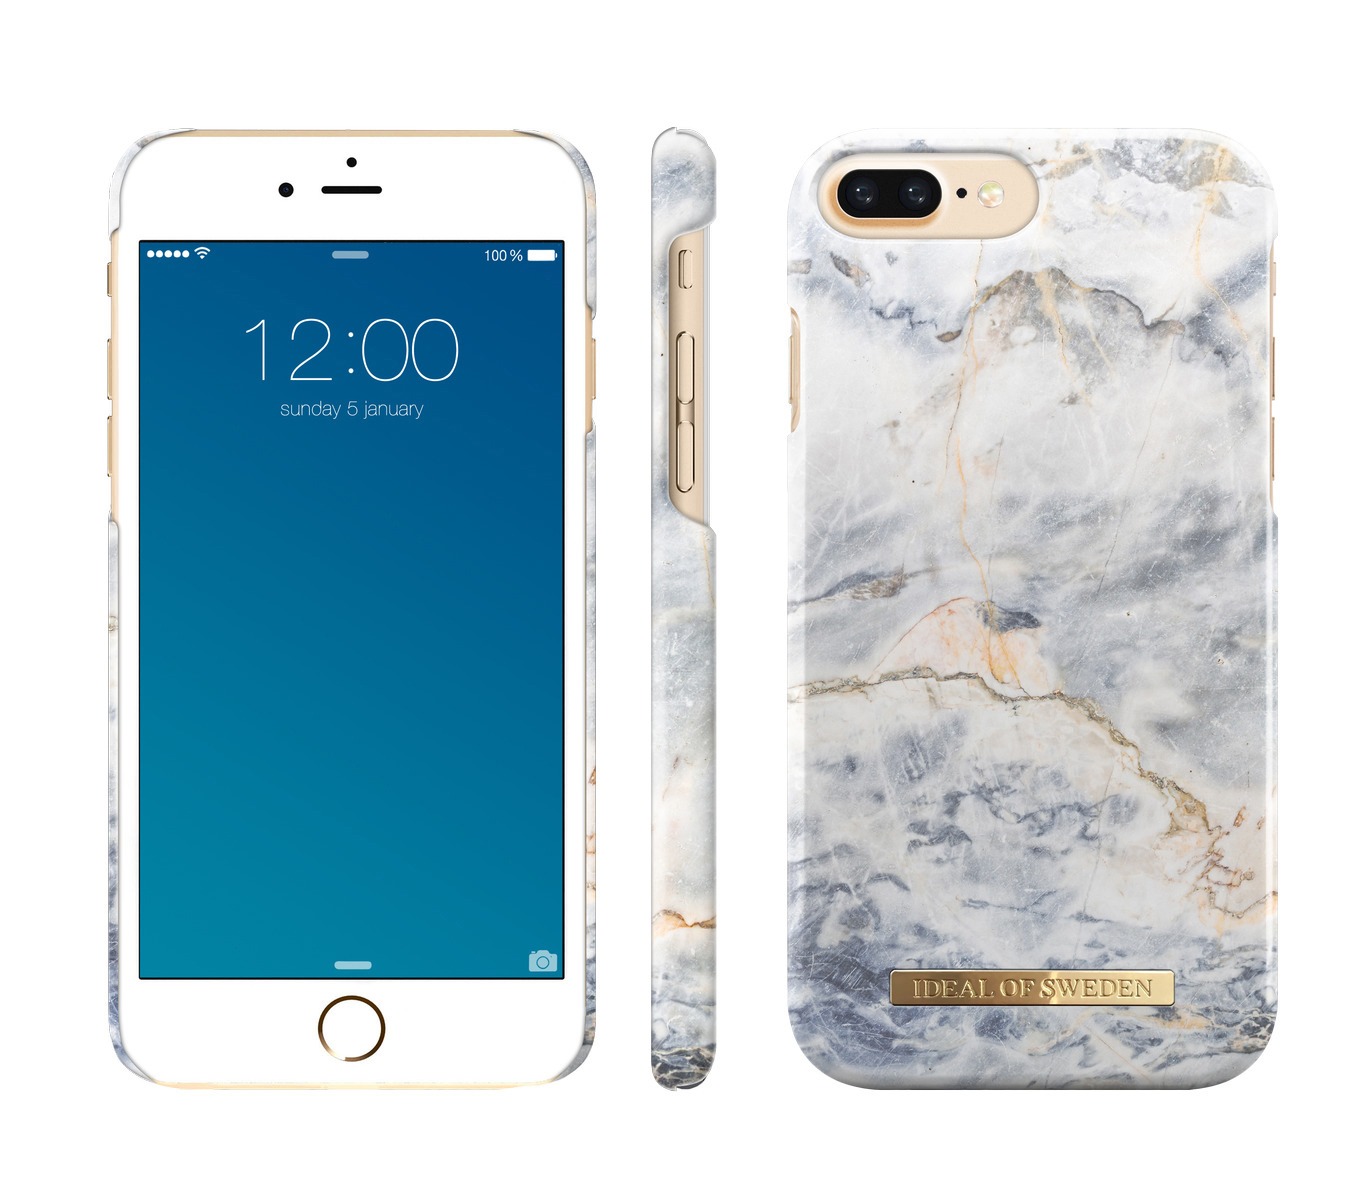 SWEDEN iPhone Ocean Plus 6 IDEAL ,iPhone Plus, iPhone 8 Marble Fashion, Plus, Backcover, Apple, OF 7